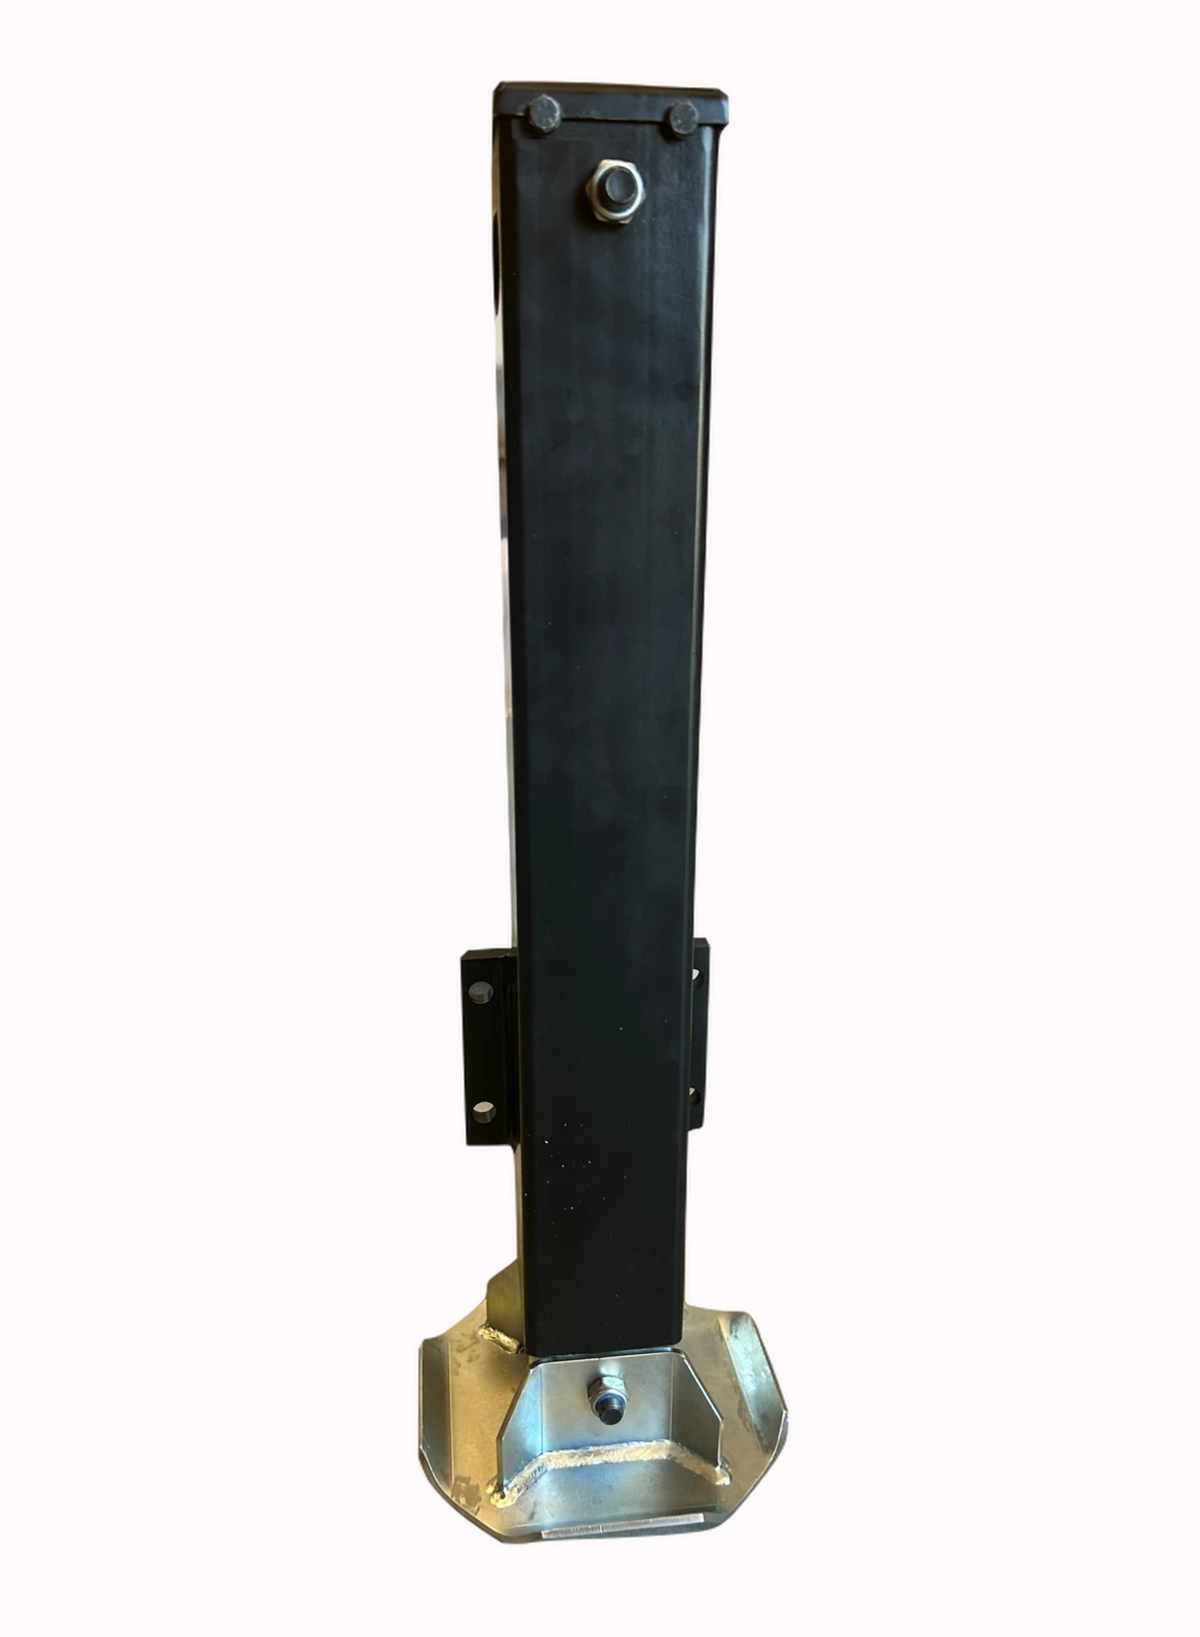 Primary Mover Hydraulic Trailer Jack Leg: Sturdy metal pole with bolt, zinc-plated components. 12,000-pound lifting capacity, hydraulic system, dual holding valve for stability.